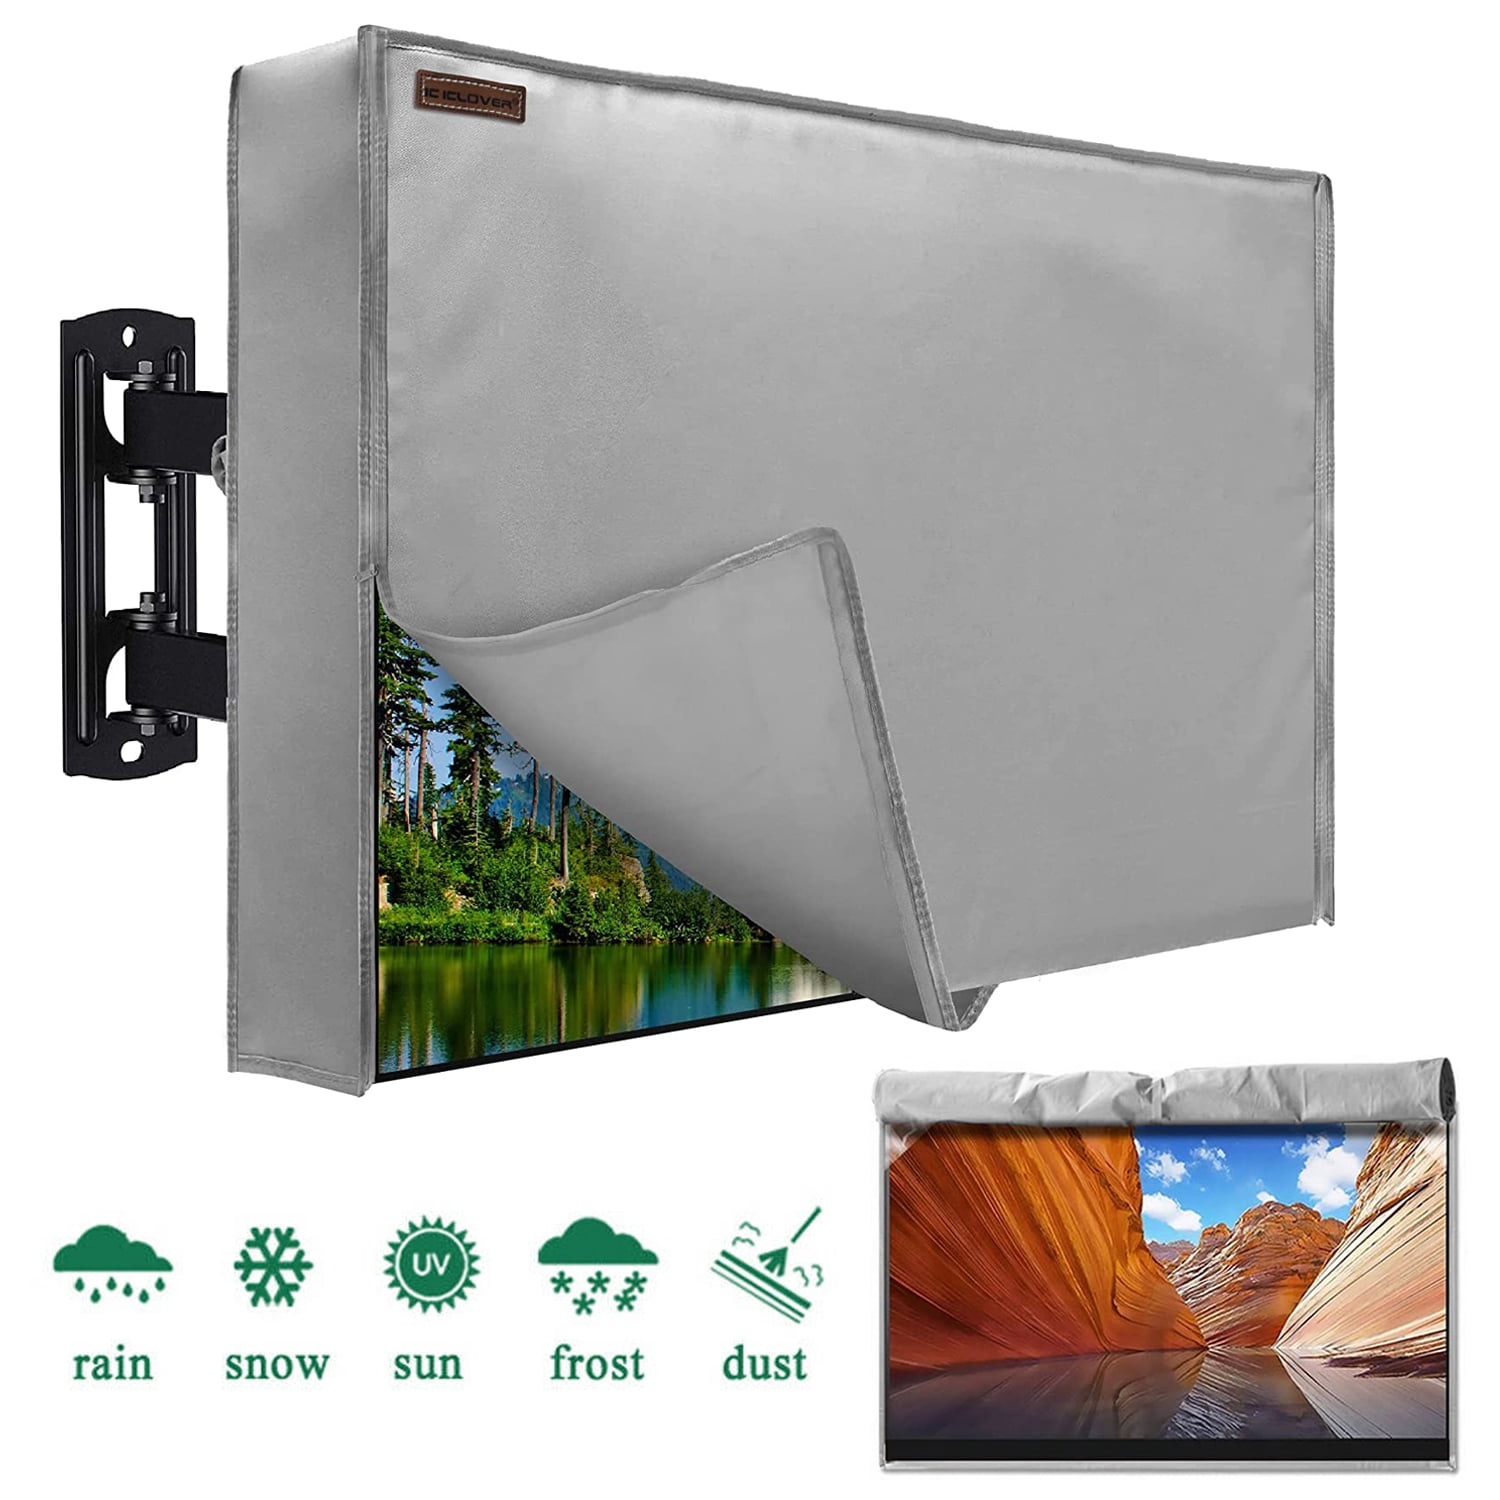 IC Iclover 52 inch-55 inch Outdoor TV Cover LED Flat Screen Protector - with Bottom Cover and Double Zipper - 600D Weatherproof Weather Dust Resistant